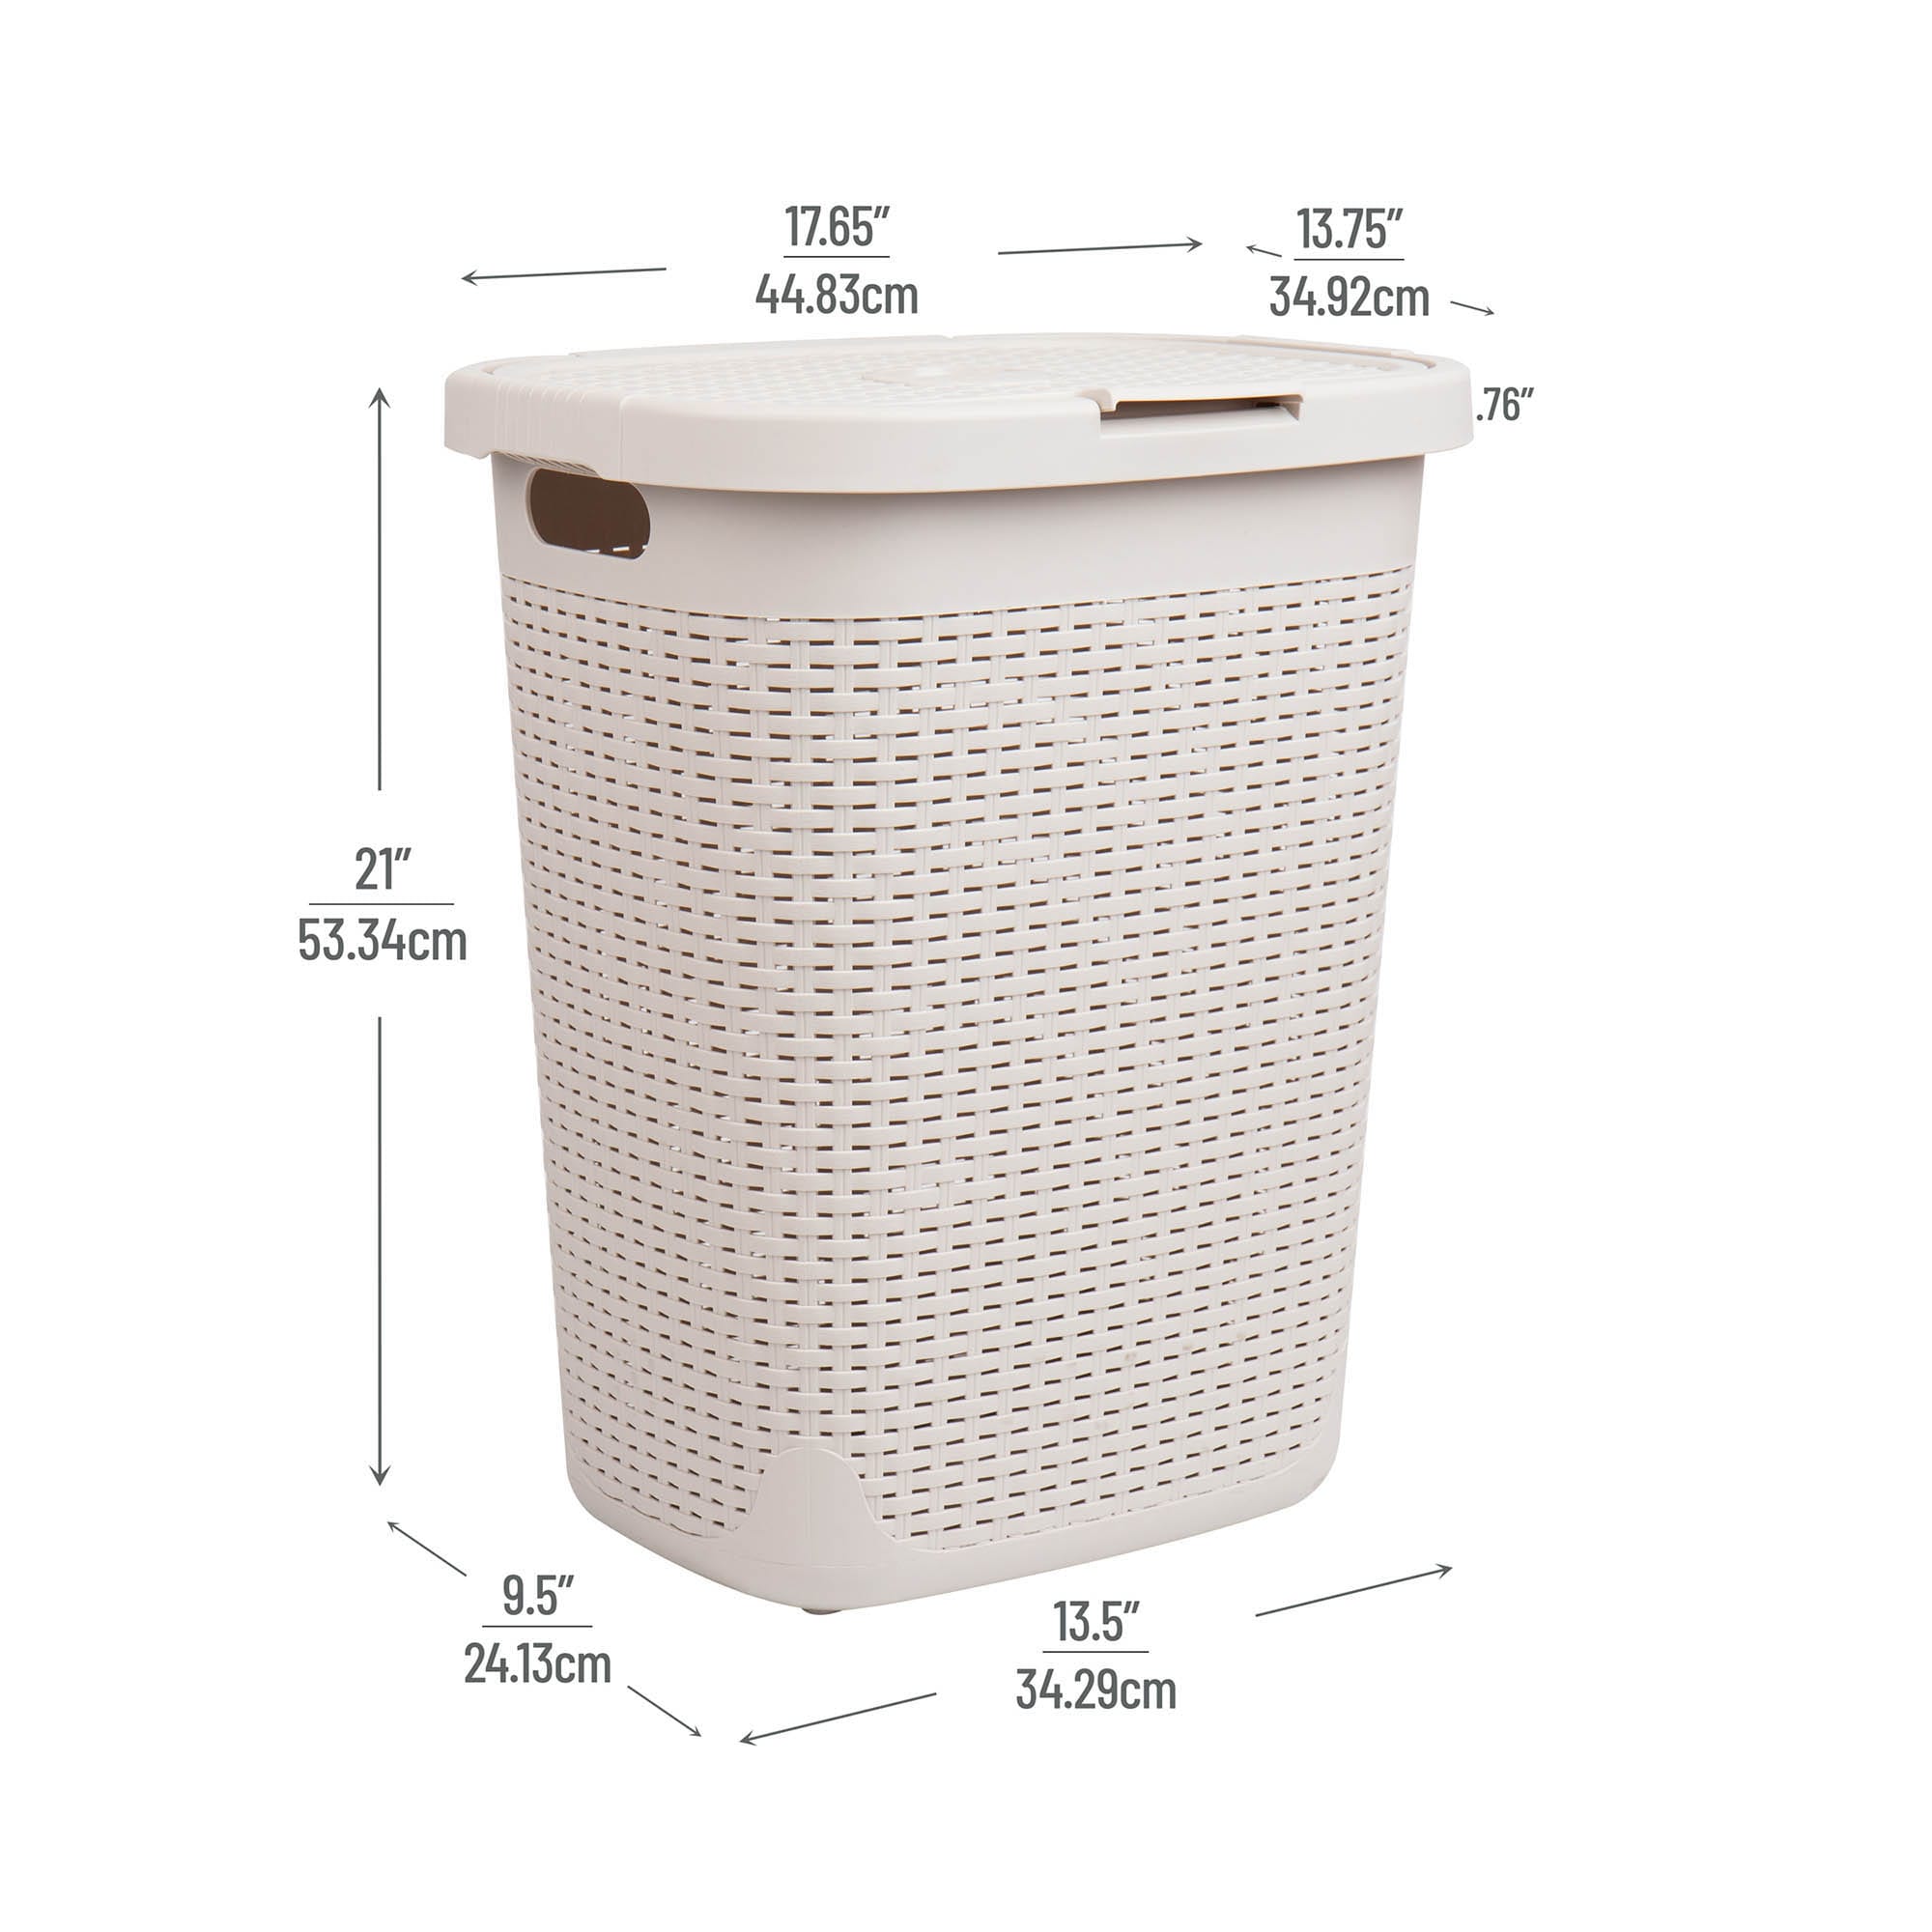 Better Homes & Gardens Collapsible Canvas Laundry Basket - Ivory - 21 x 14 x 12 in